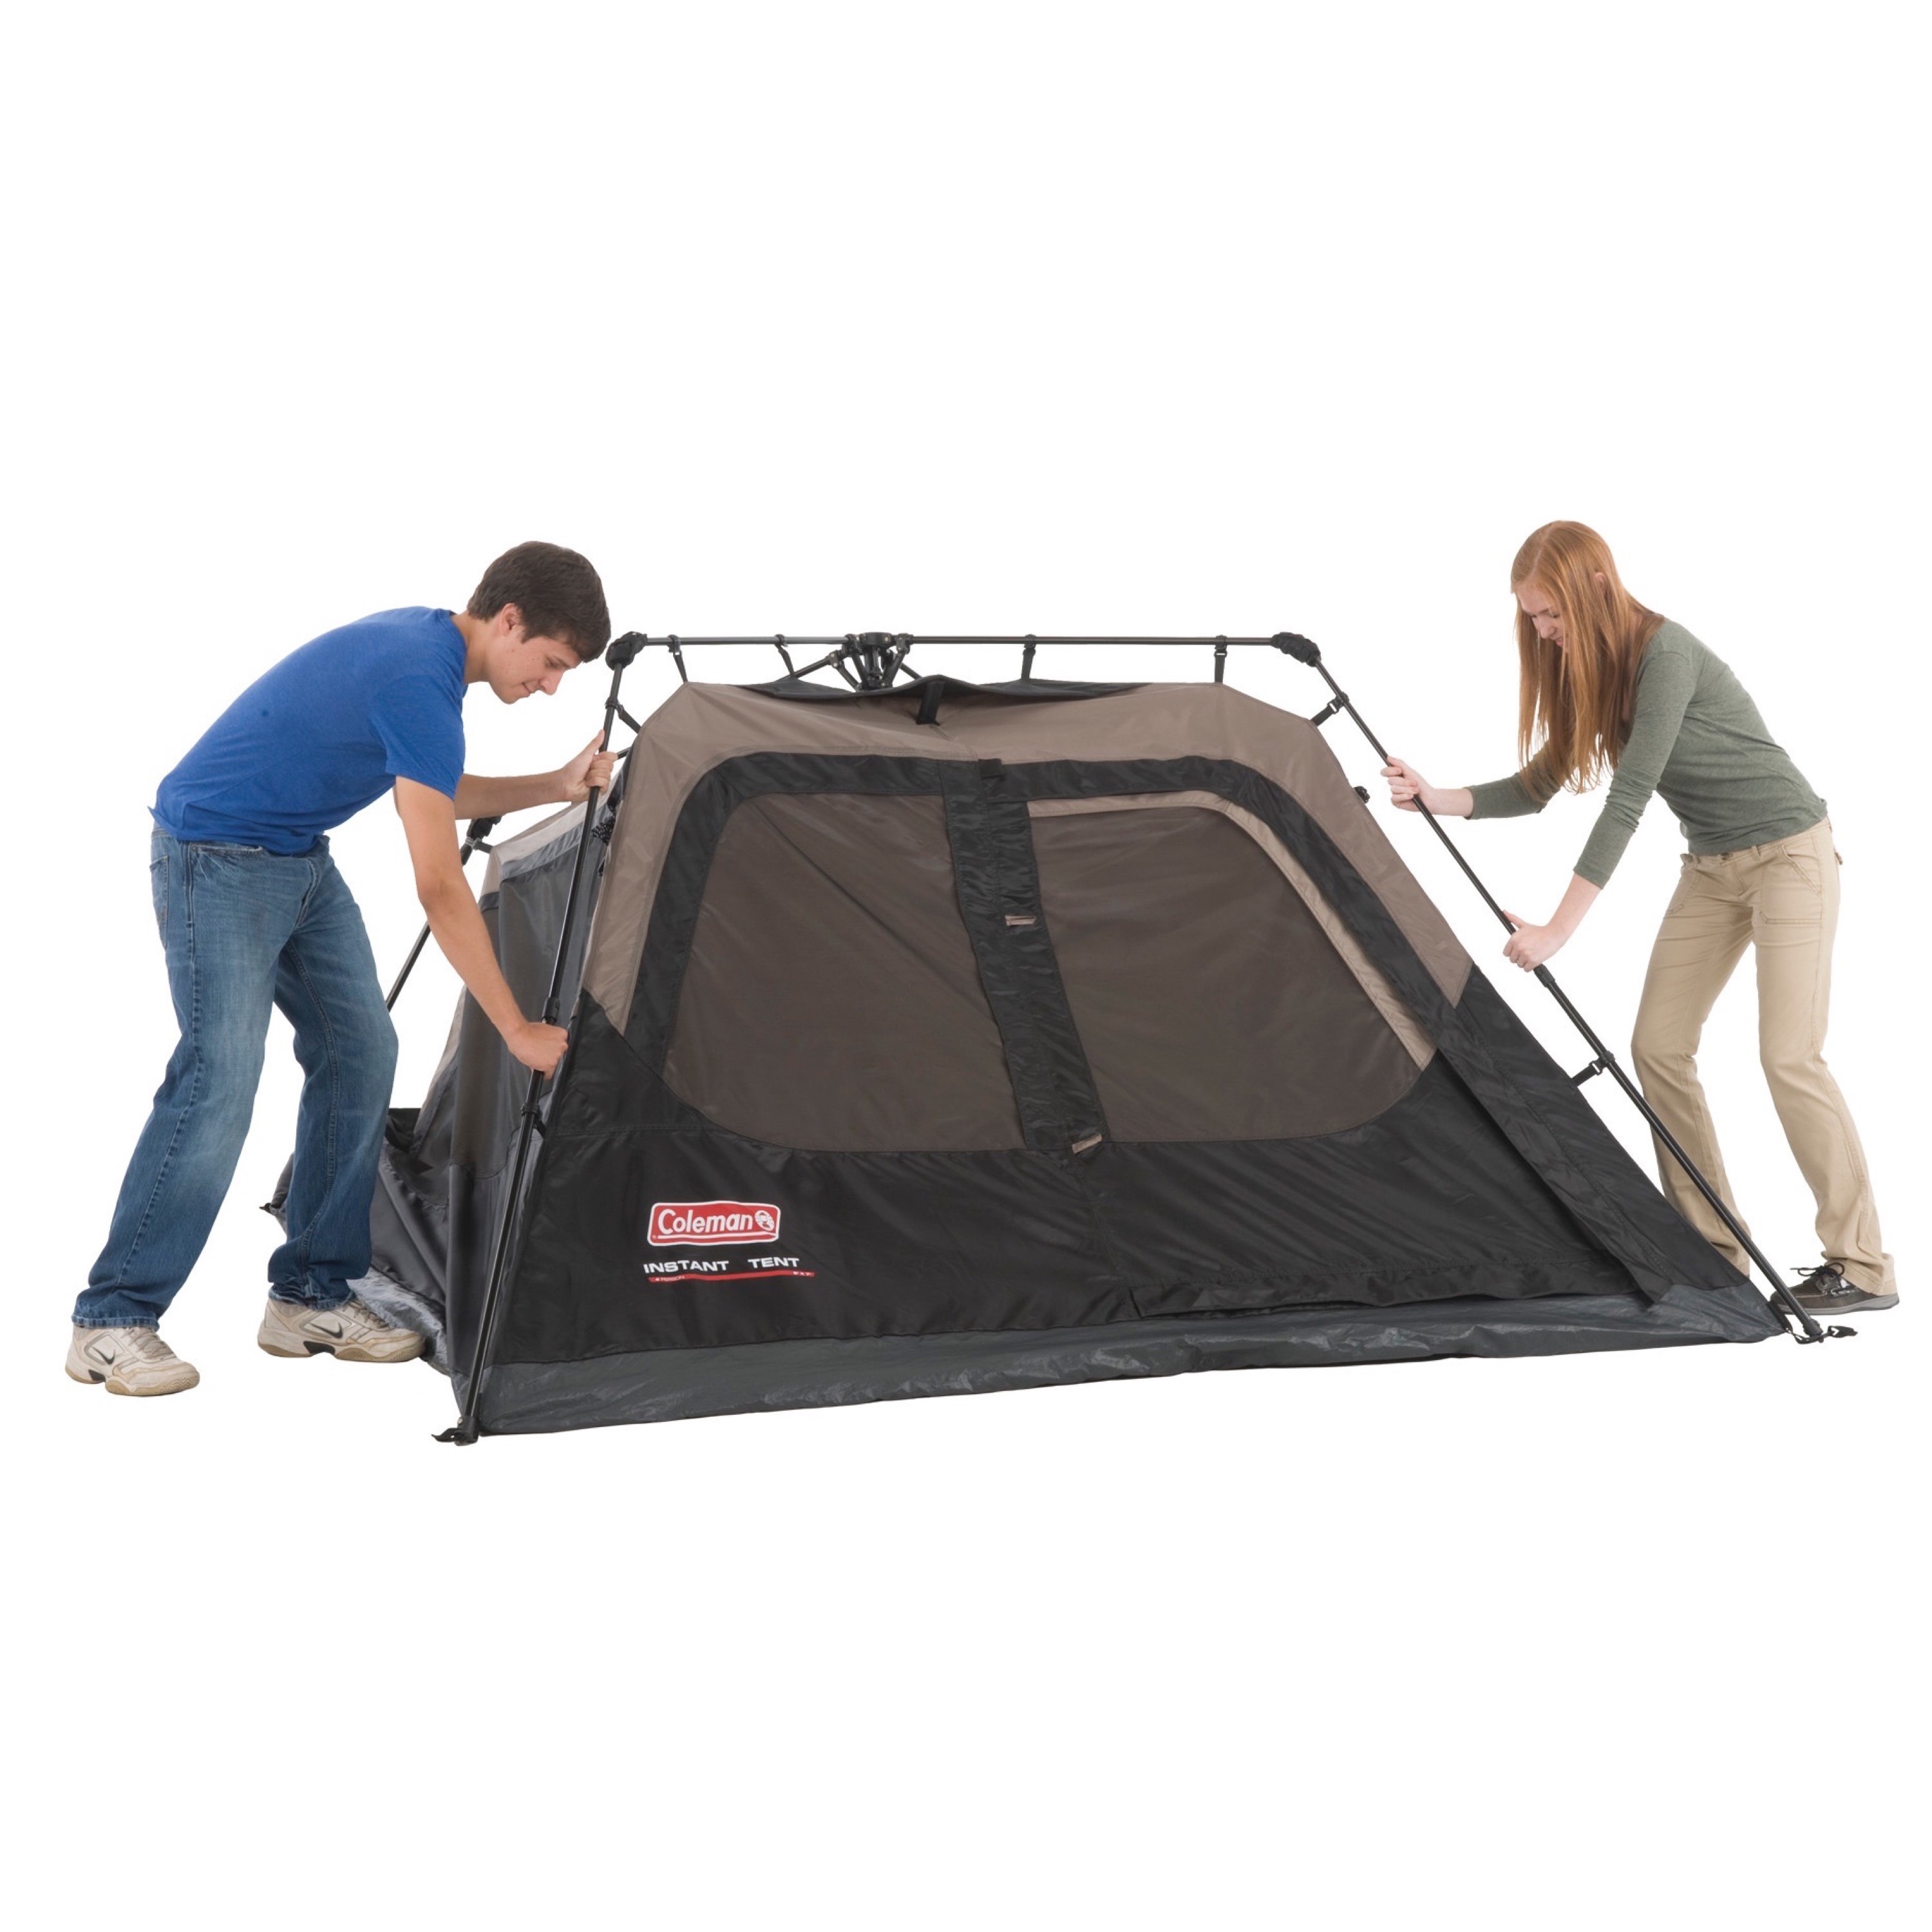 Coleman 4-Person Cabin Camping Tent with Instant Setup, 1 Room, Gray - image 5 of 7